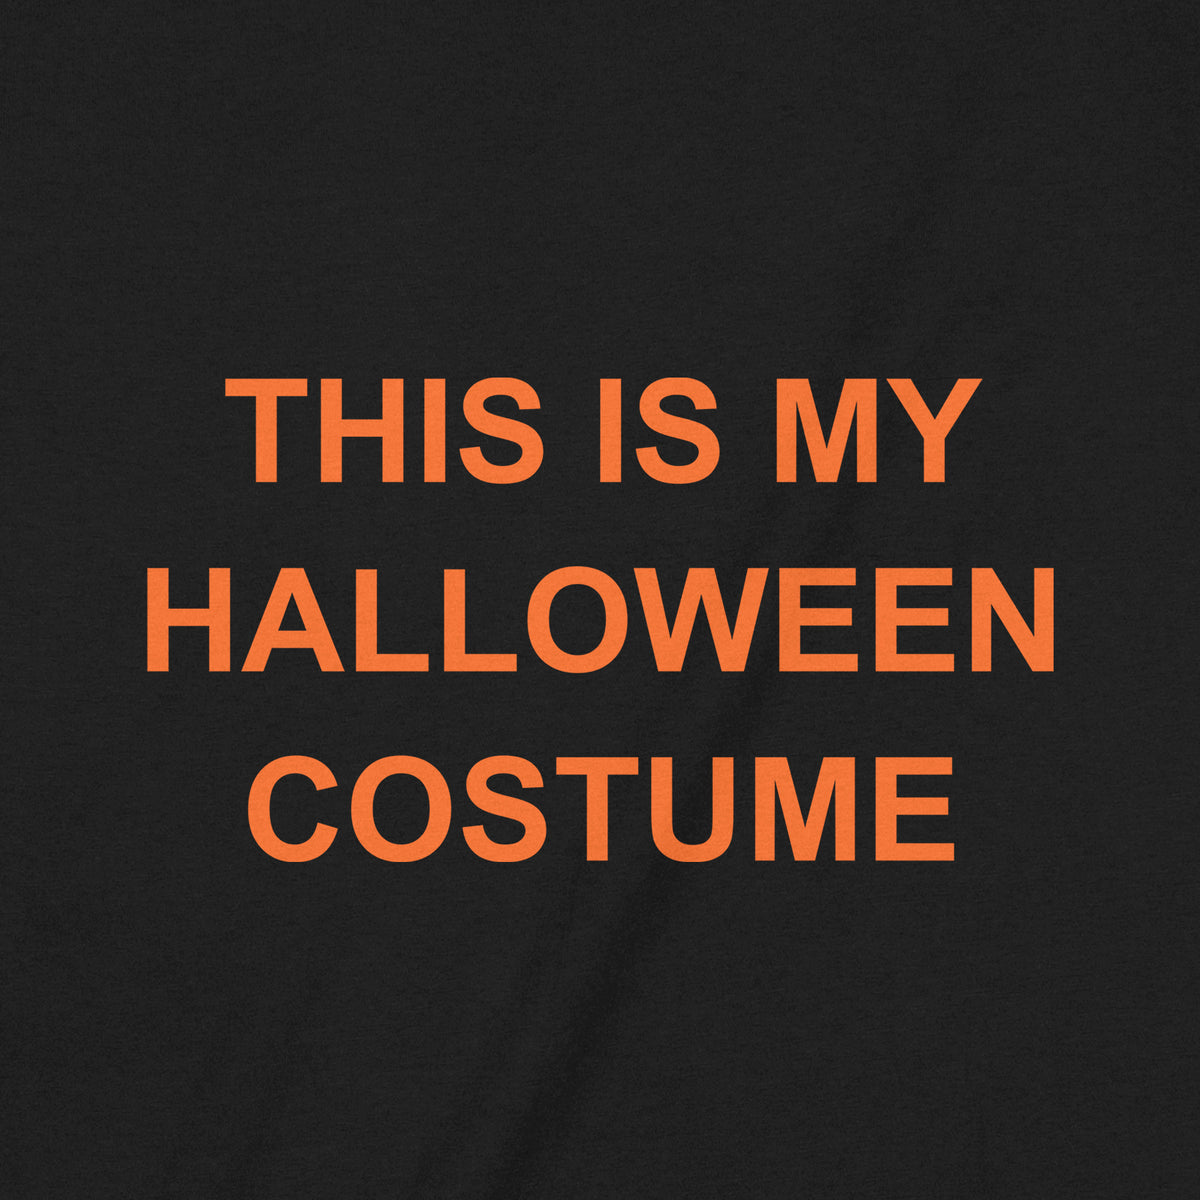 "This Is My Halloween Costume" Premium Midweight Ringspun Cotton T-Shirt - Mens/Womens Fits